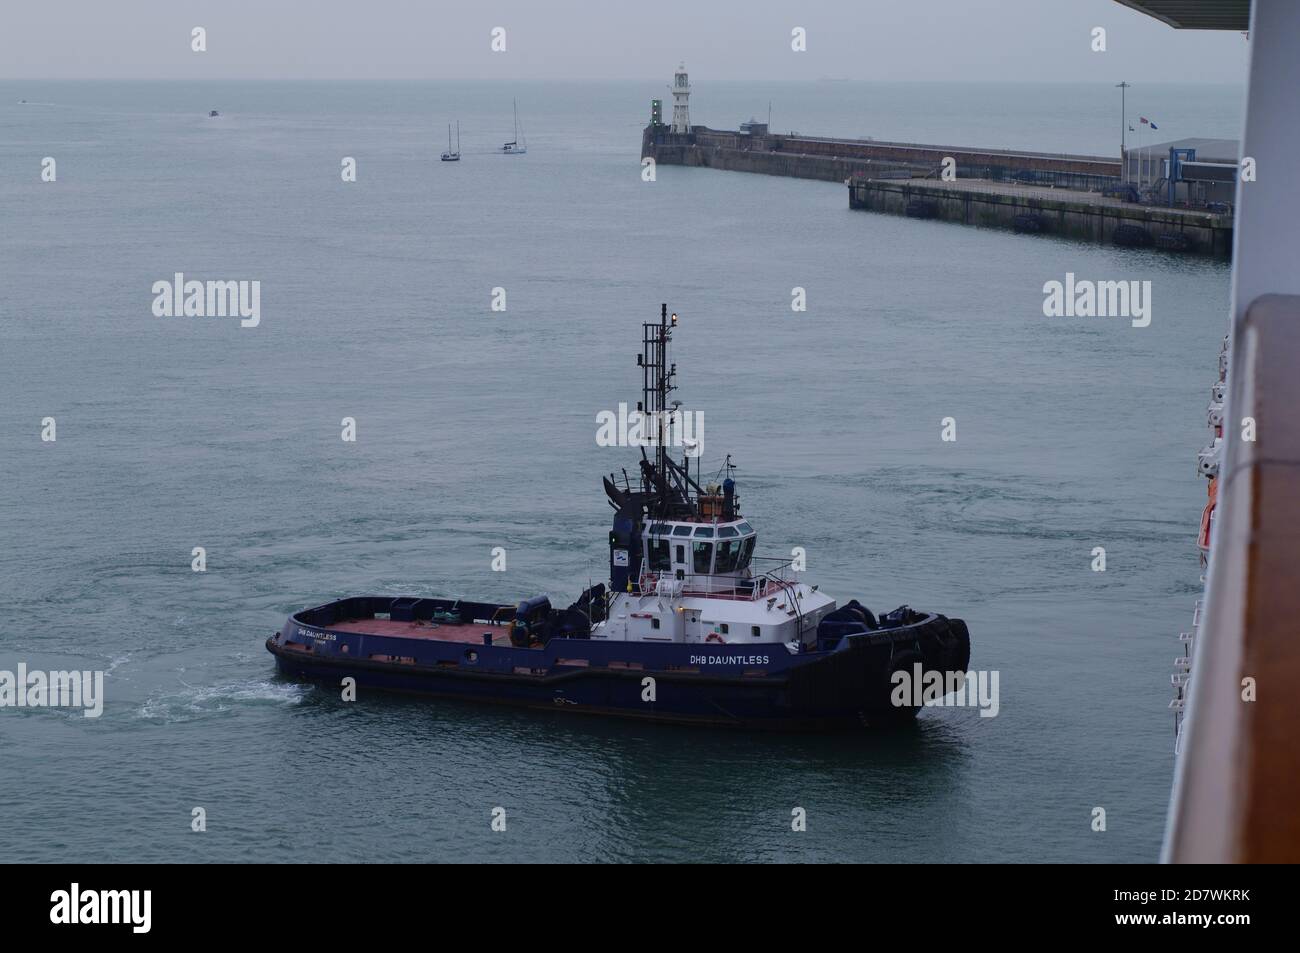 TUG, DHB Dauntless, IMO 9190456, Dover Harbour, Kent, Angleterre, Royaume-Uni Banque D'Images